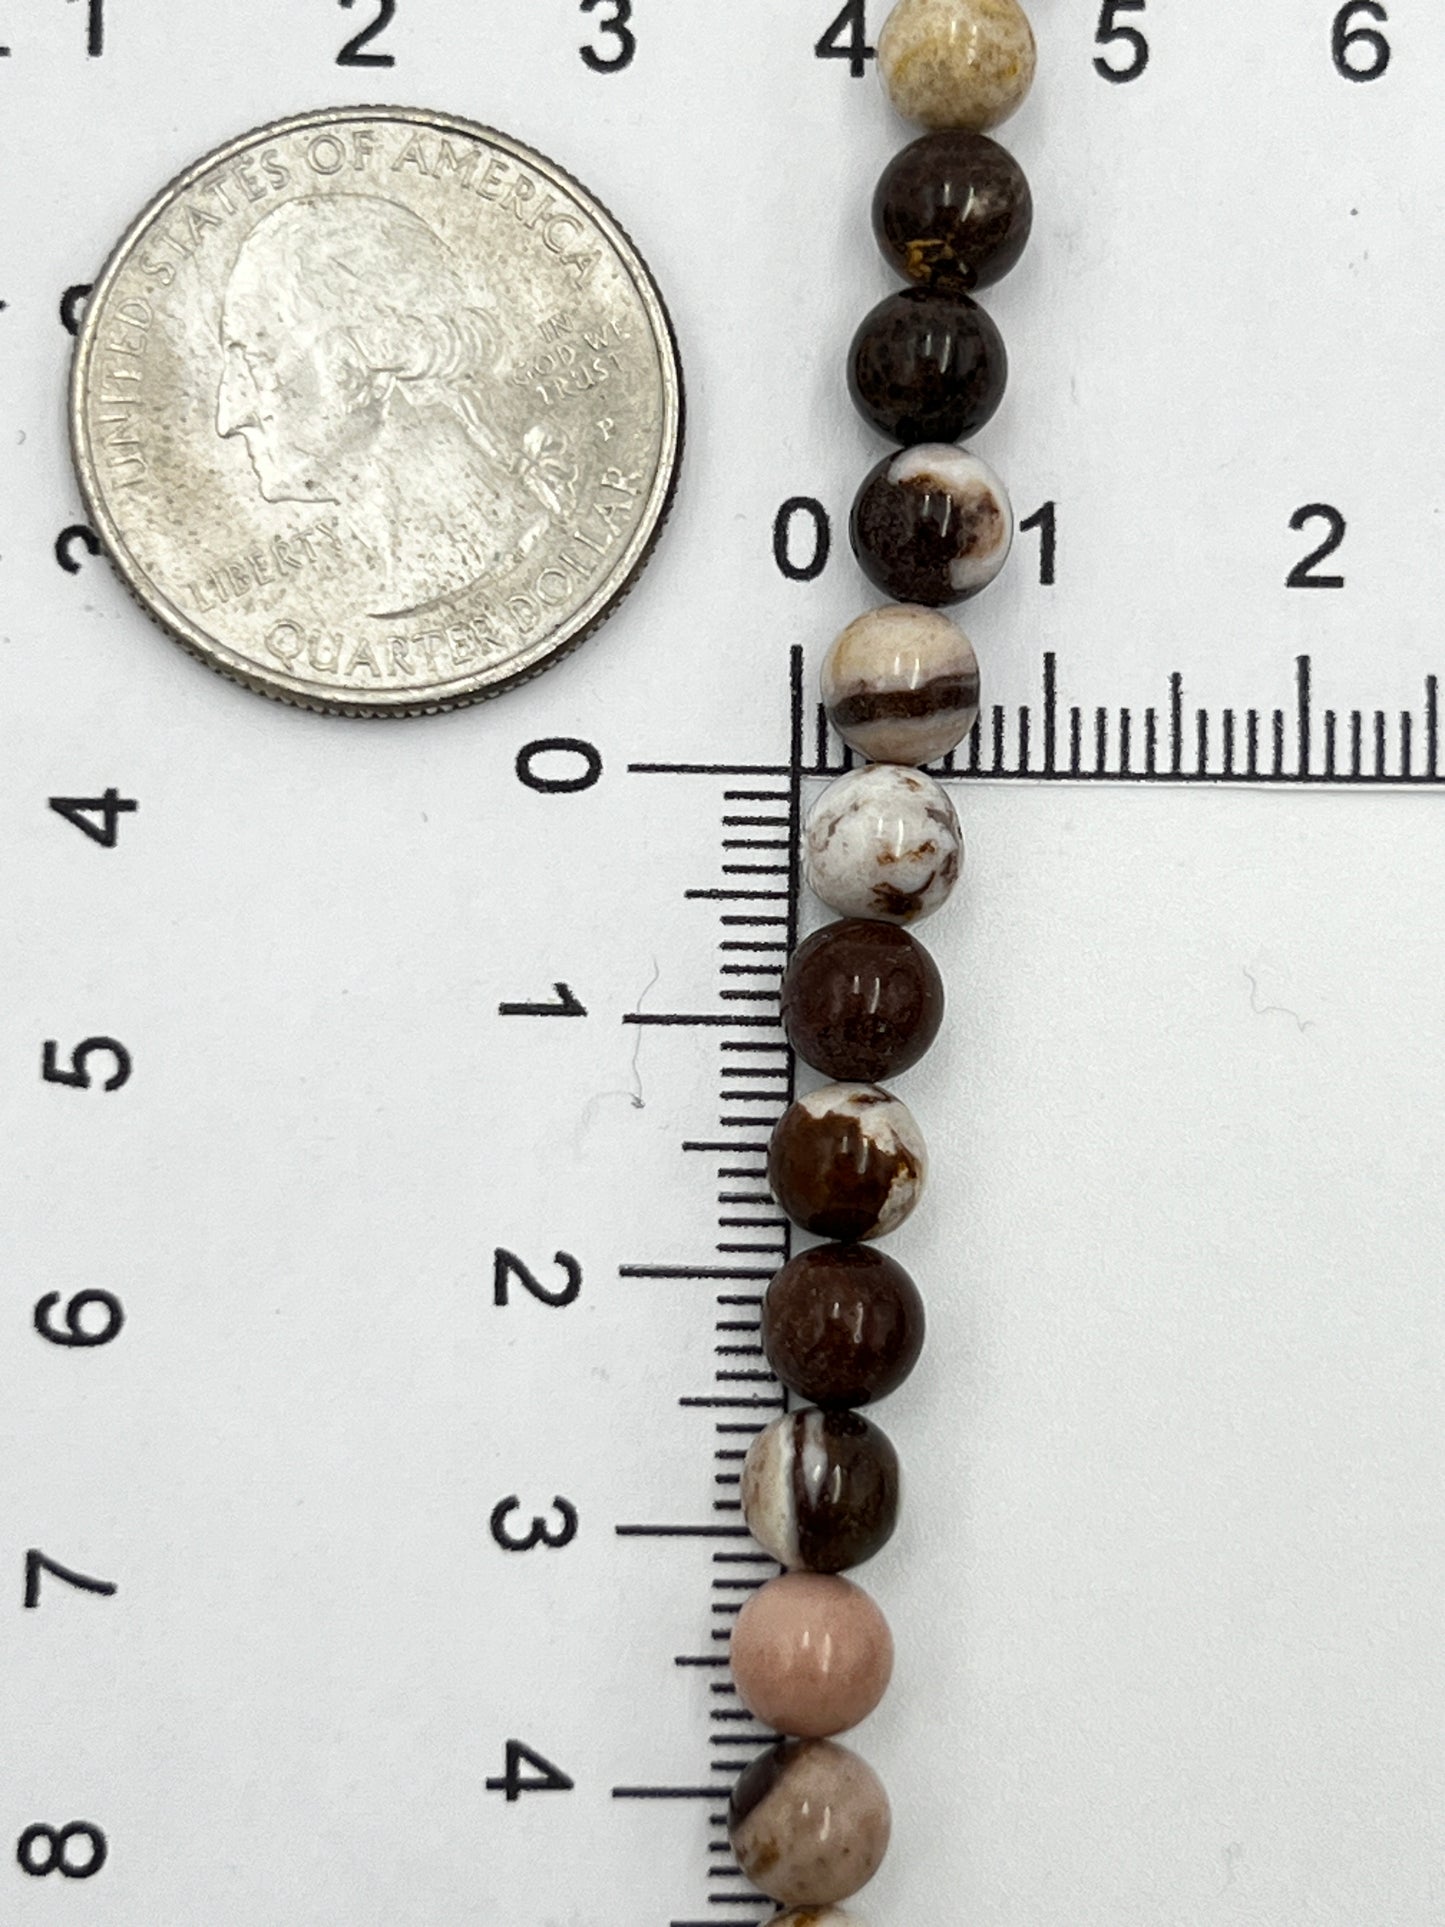 Brown Agate 6mm 1 Strand (40cm) 55 Beads